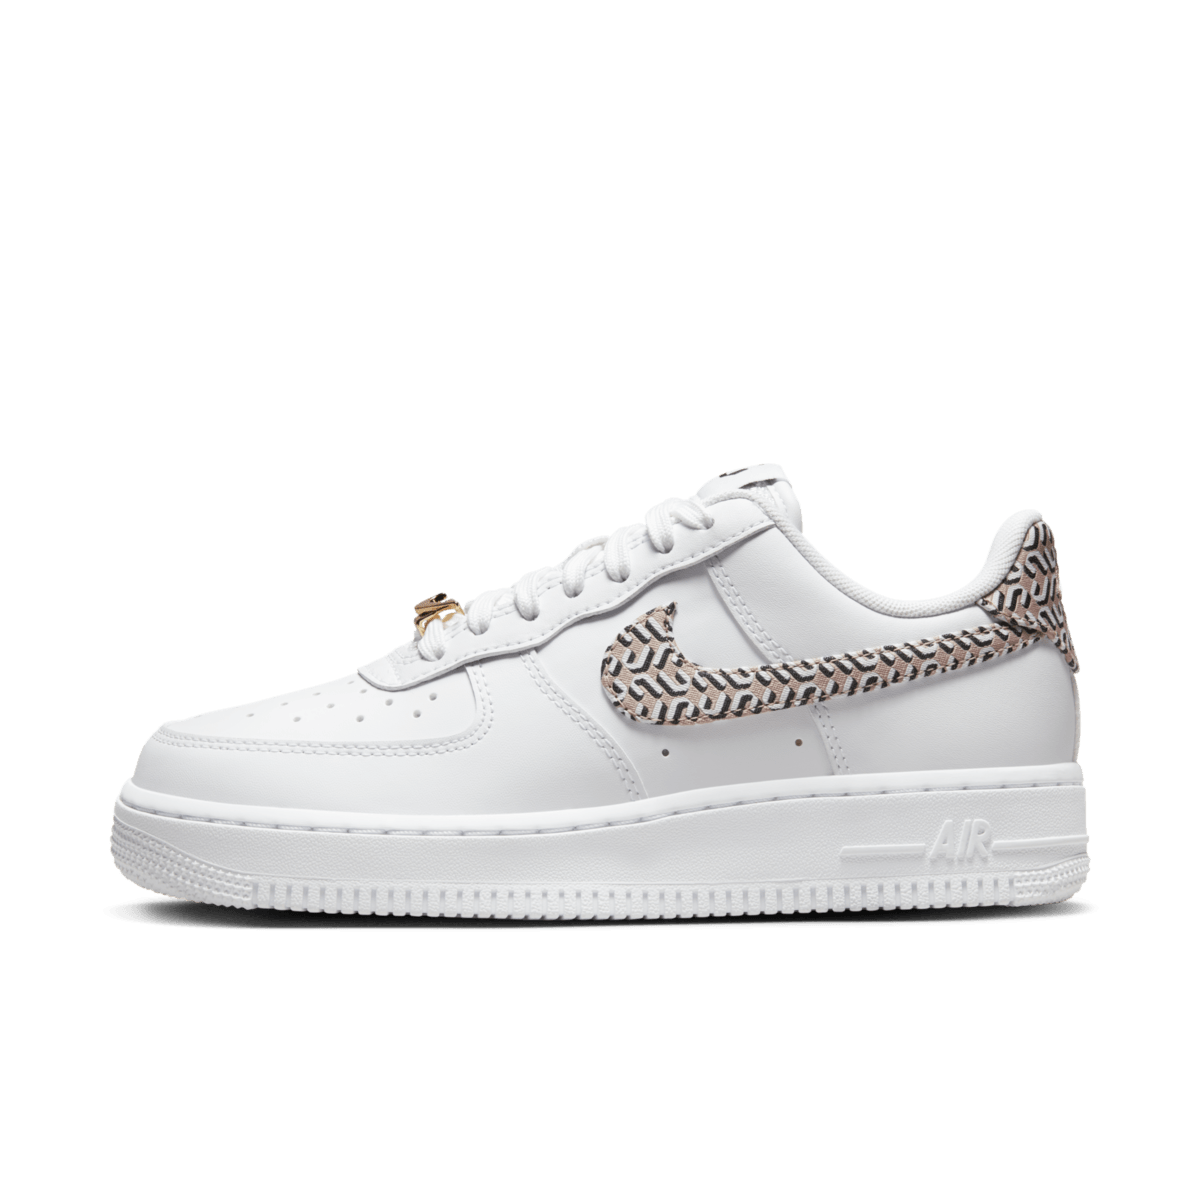 Nike Air Force 1 LX WMNS 'United in Victory' DZ2709-100